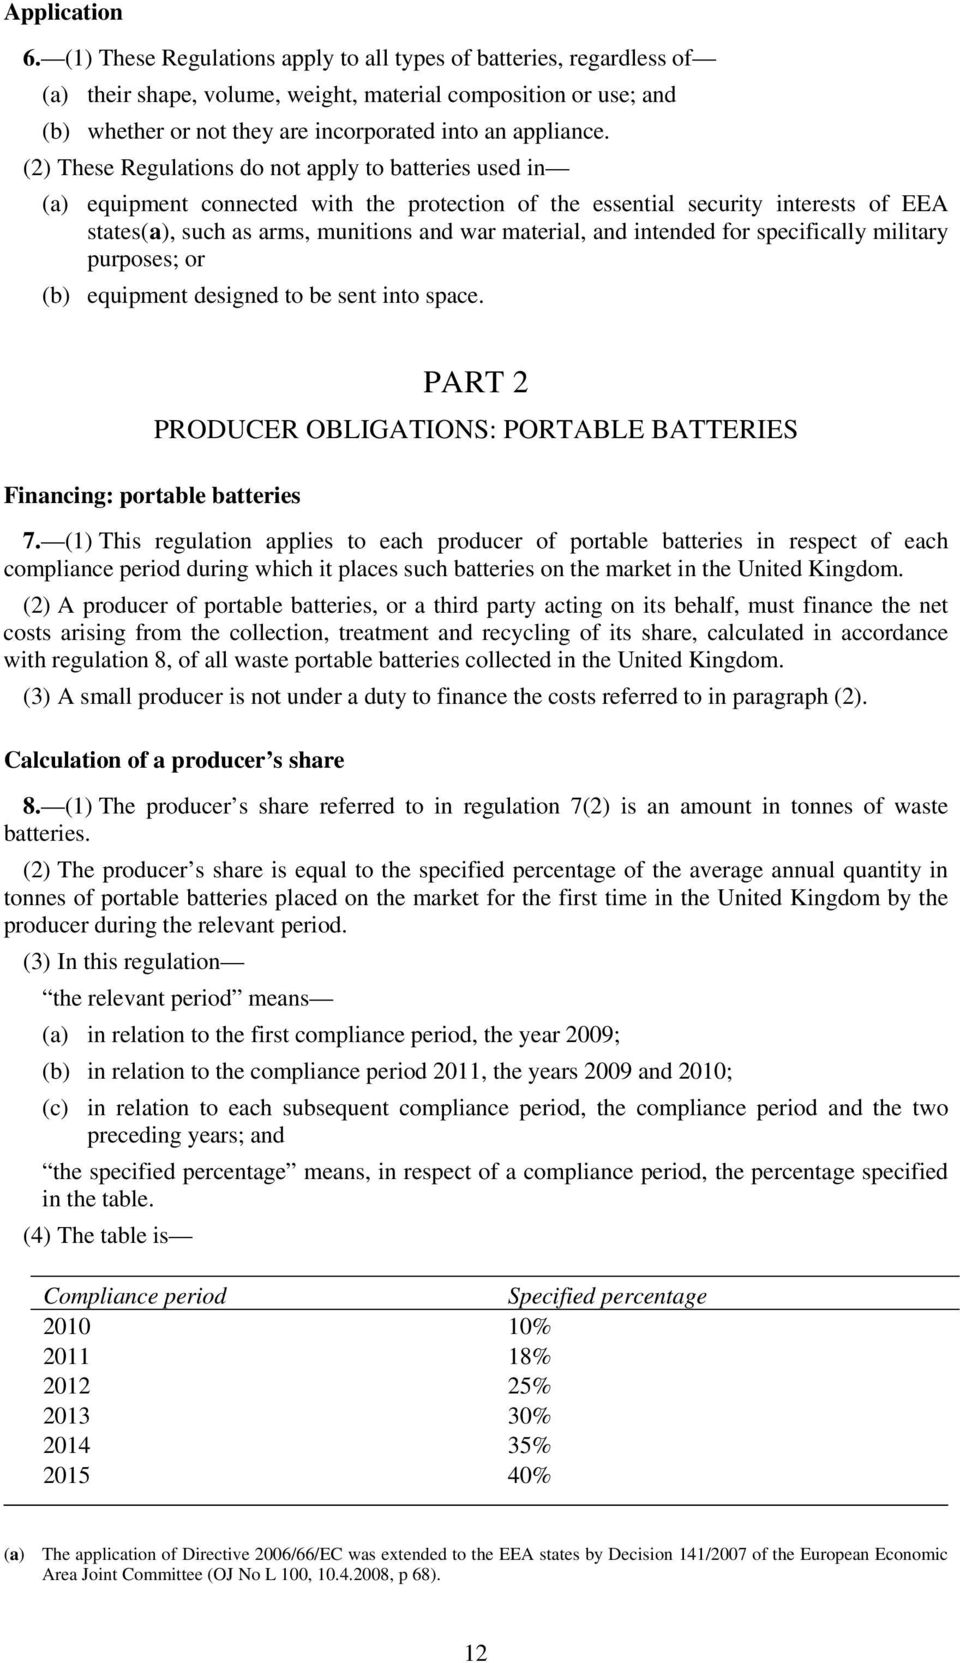 (2) These Regulations do not apply to batteries used in (a) equipment connected with the protection of the essential security interests of EEA states(a), such as arms, munitions and war material, and